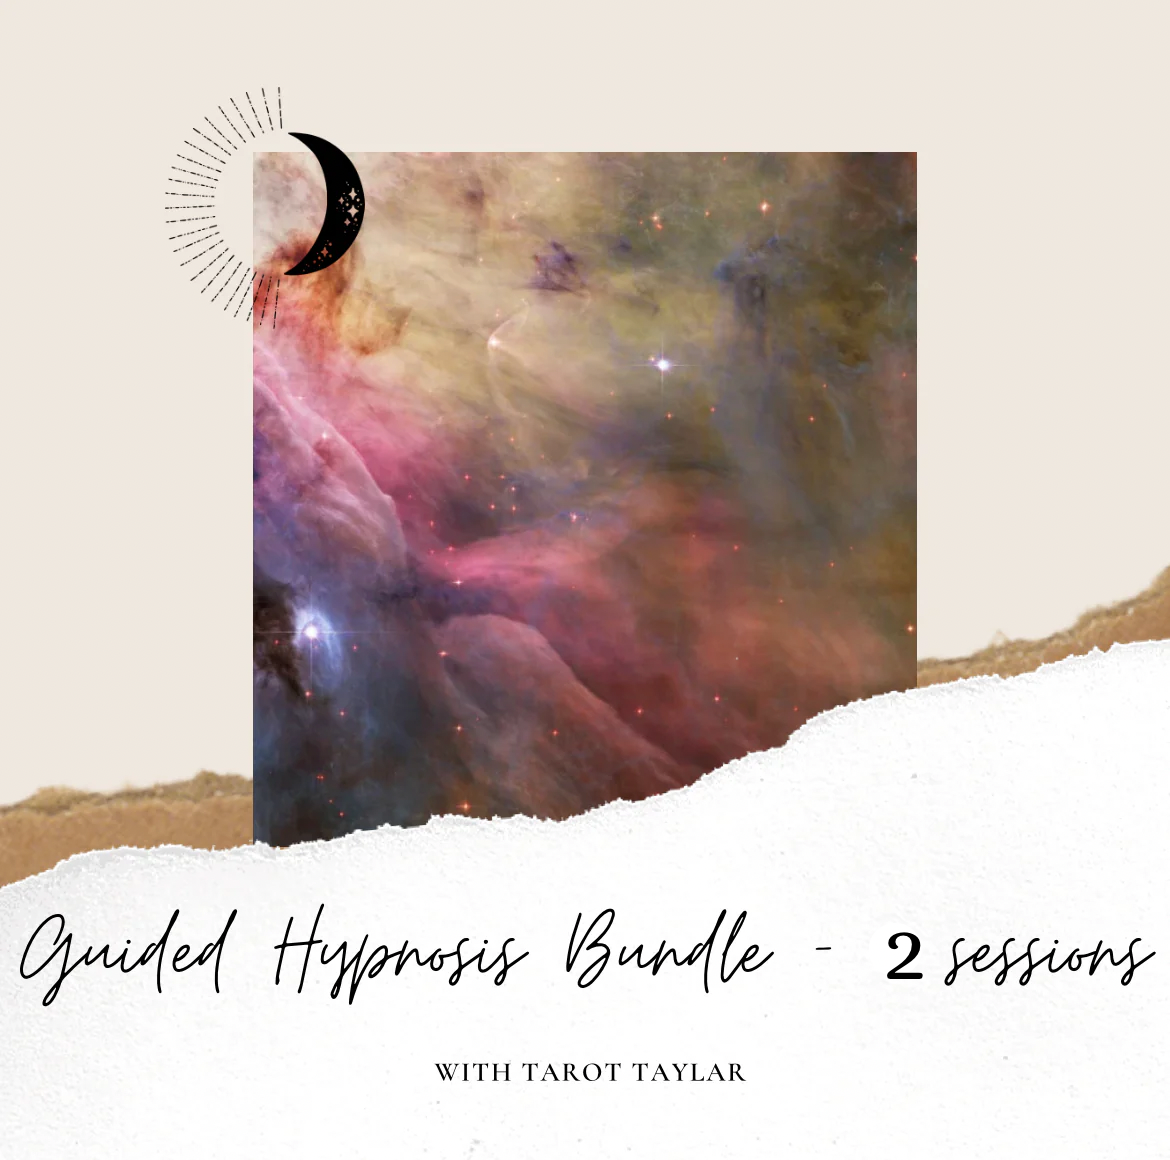 Guided Hypnosis Bundle (online) - 2 sessions